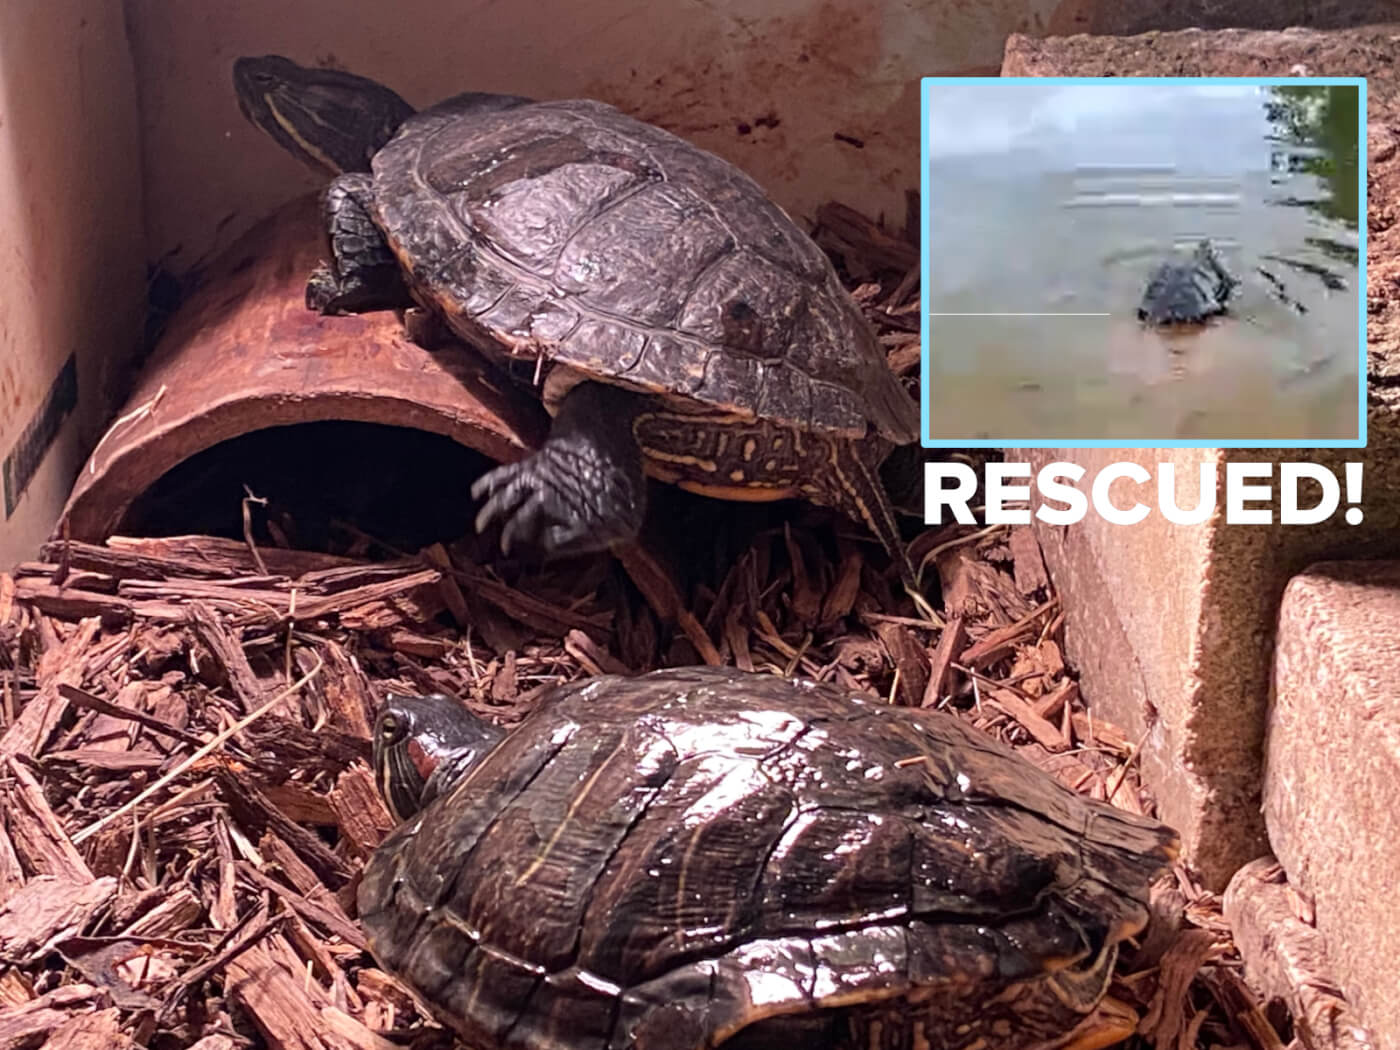 a photo of two red-eared slider turtles in a concrete enclosure, with another photo of a turtle being released into a pond, with text overlaid reading "rescued!"